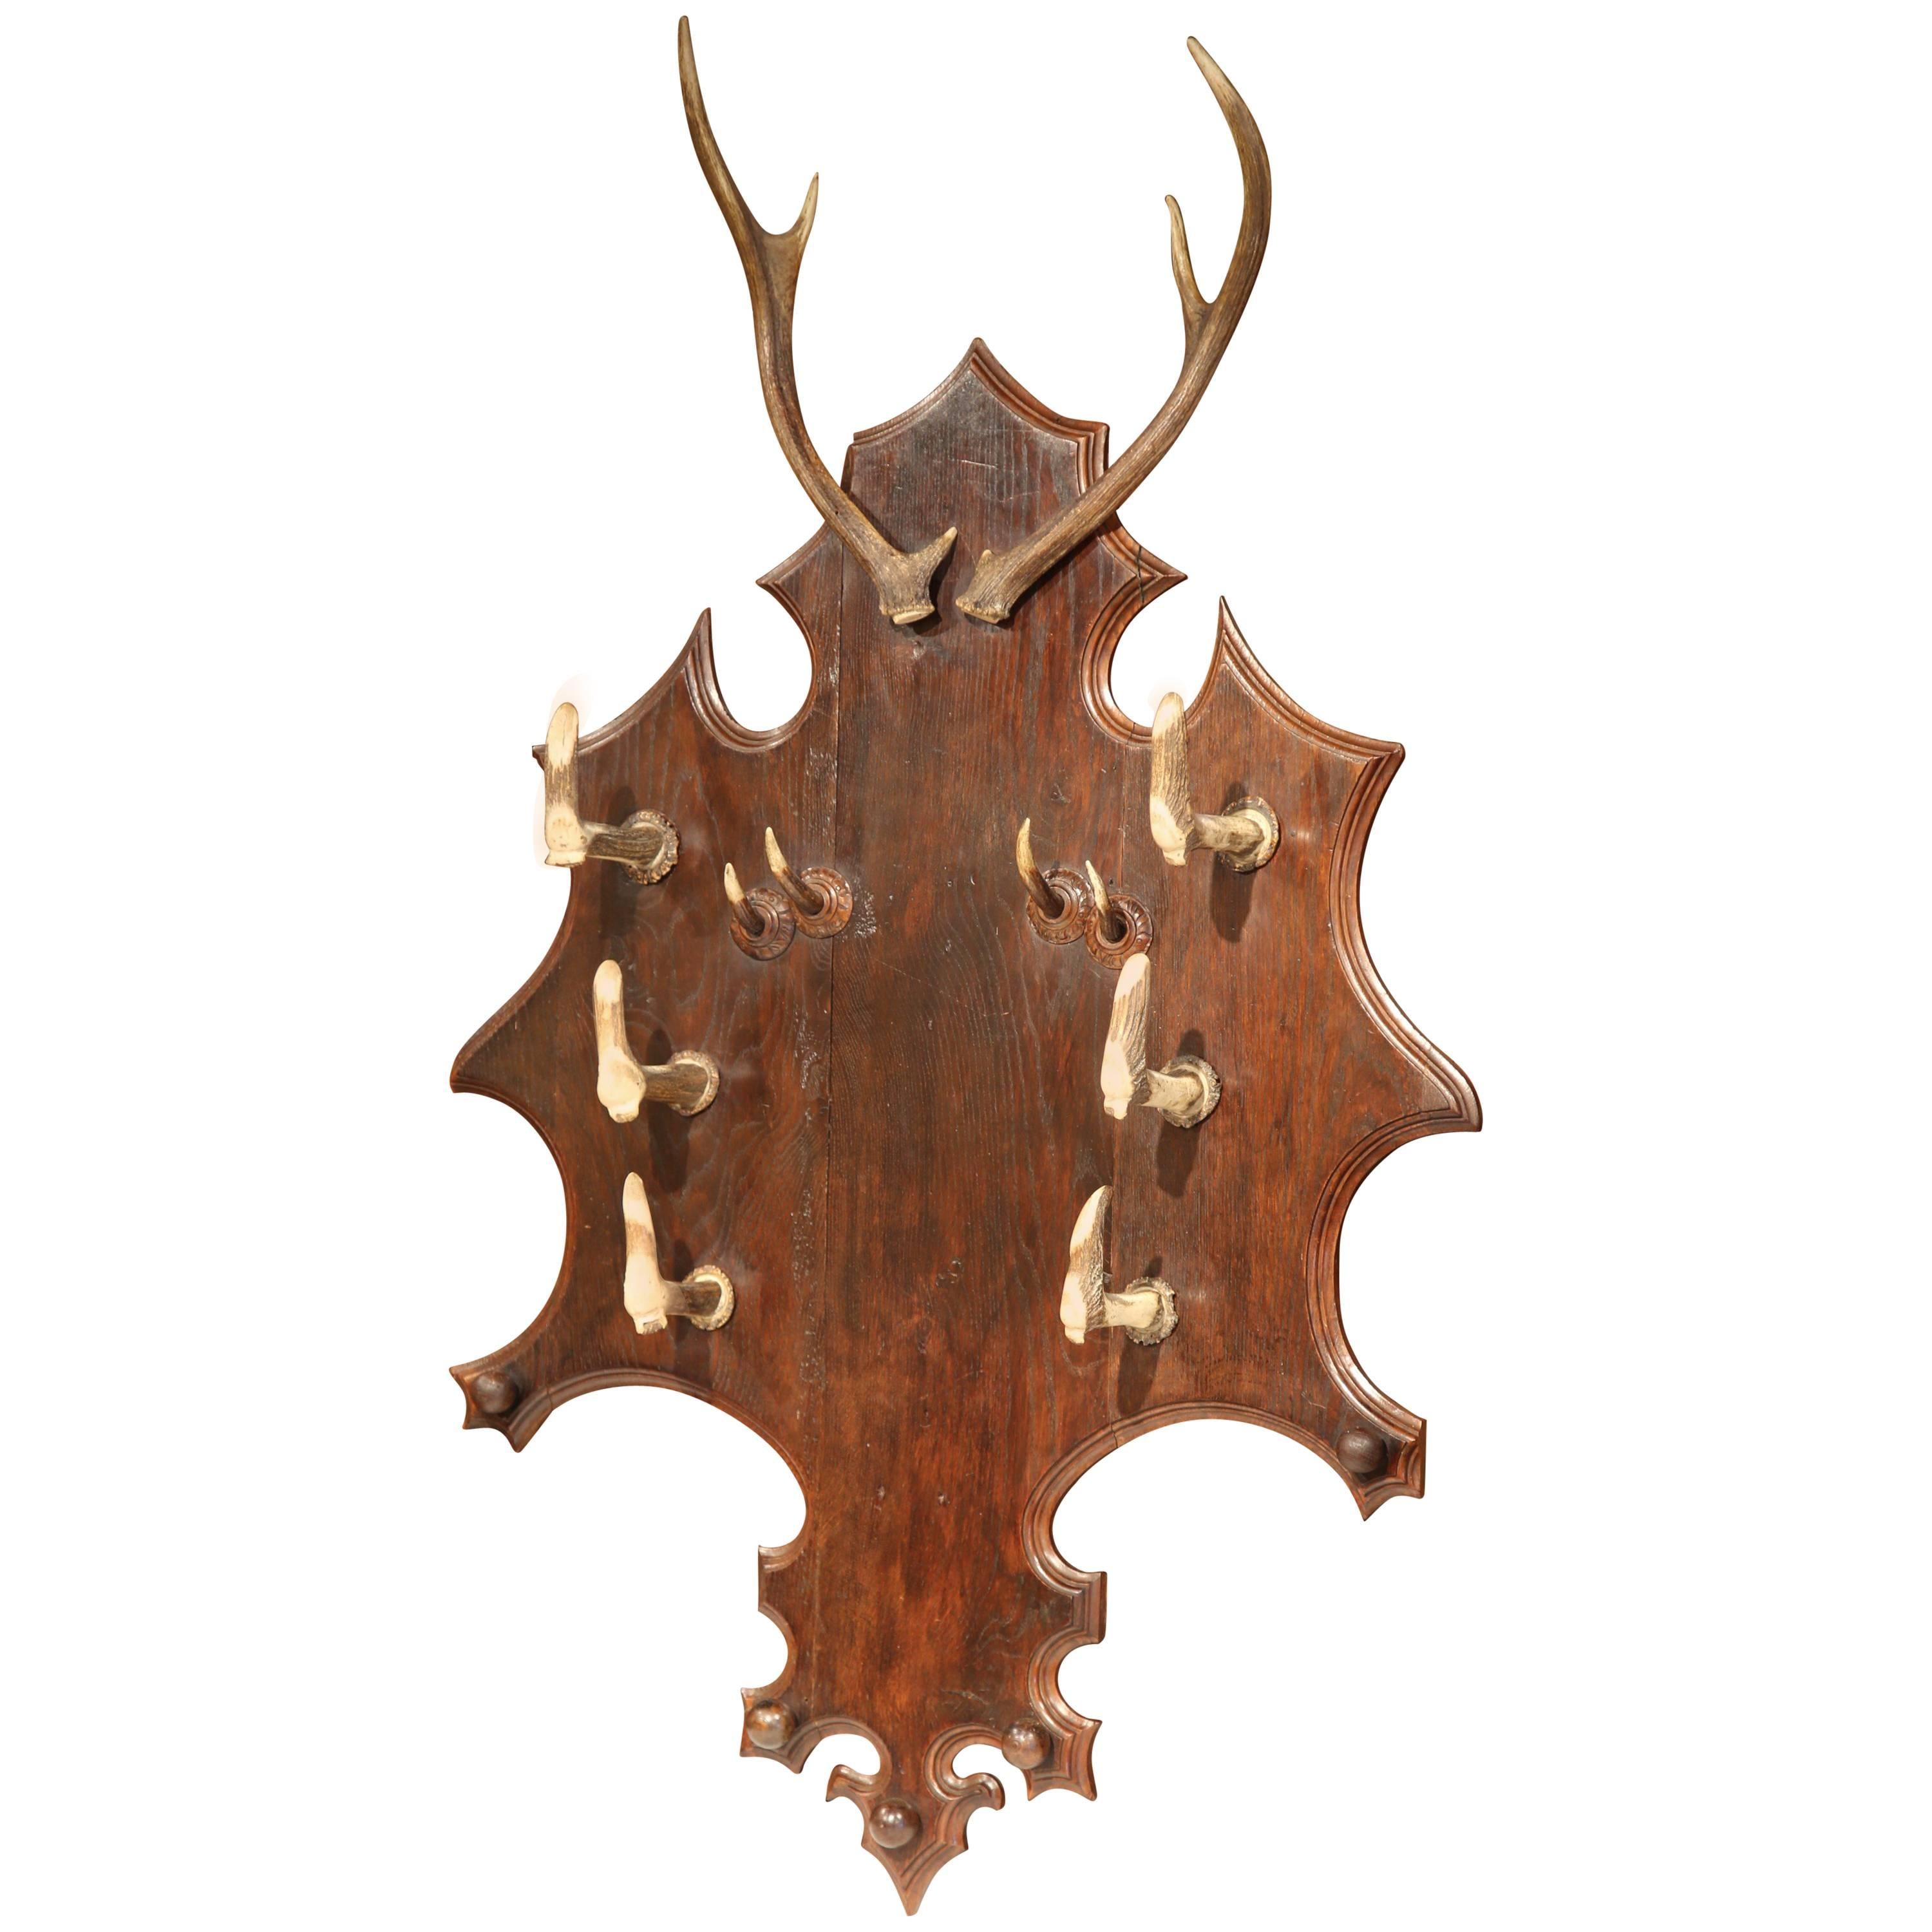 19th Century French Black Forest Carved Gun or Coat Rack with Antlers and Horns